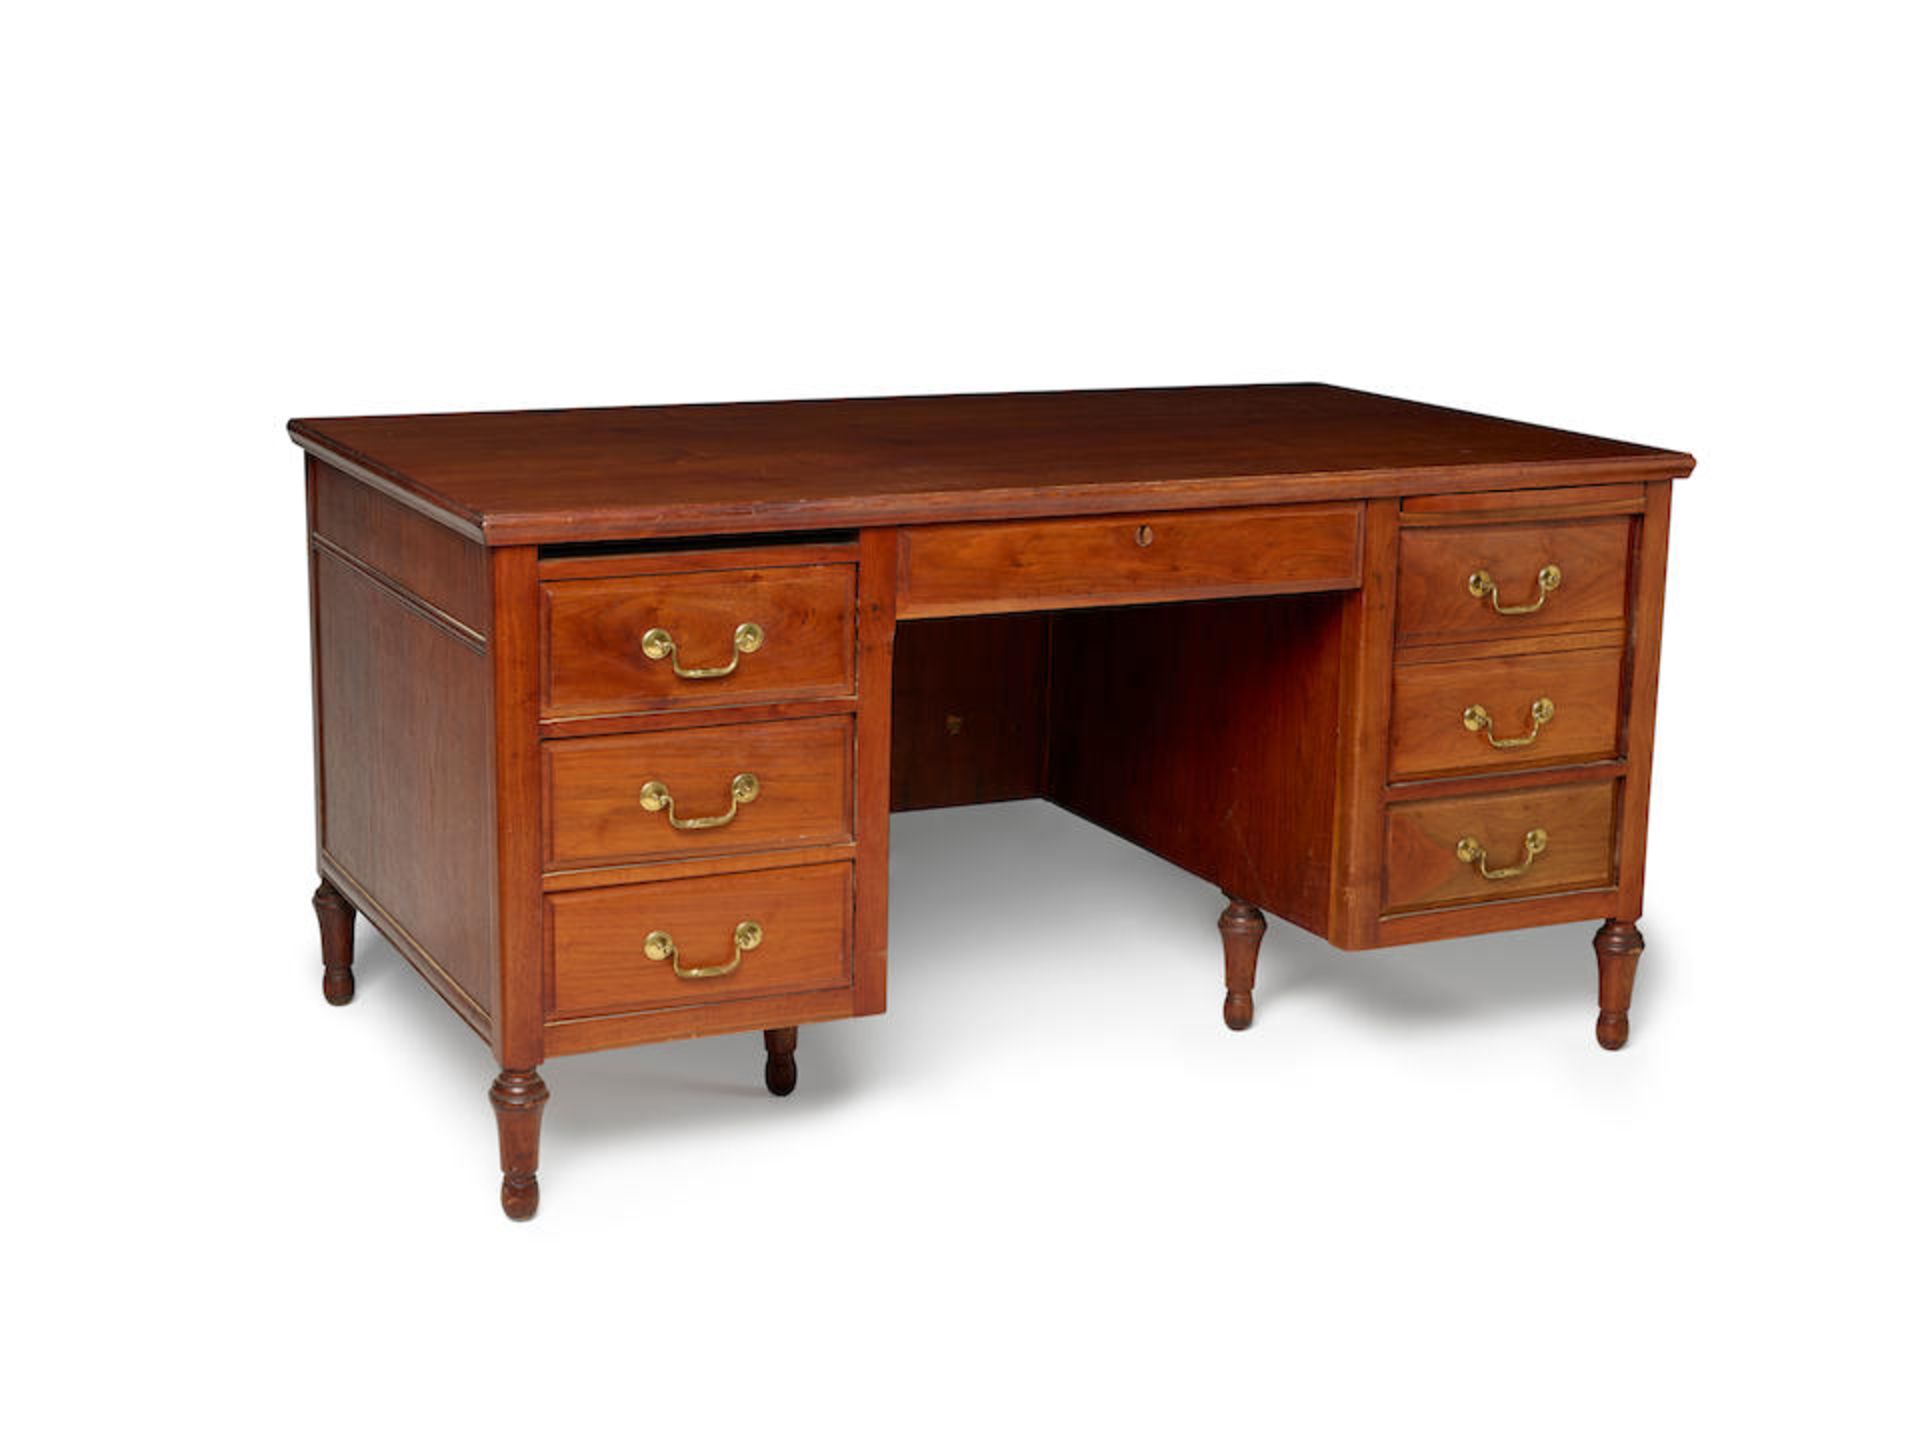 CORMAC MCCARTHY'S WRITING DESK. An antique cherrywood library desk, restored by hand by Cormac M...